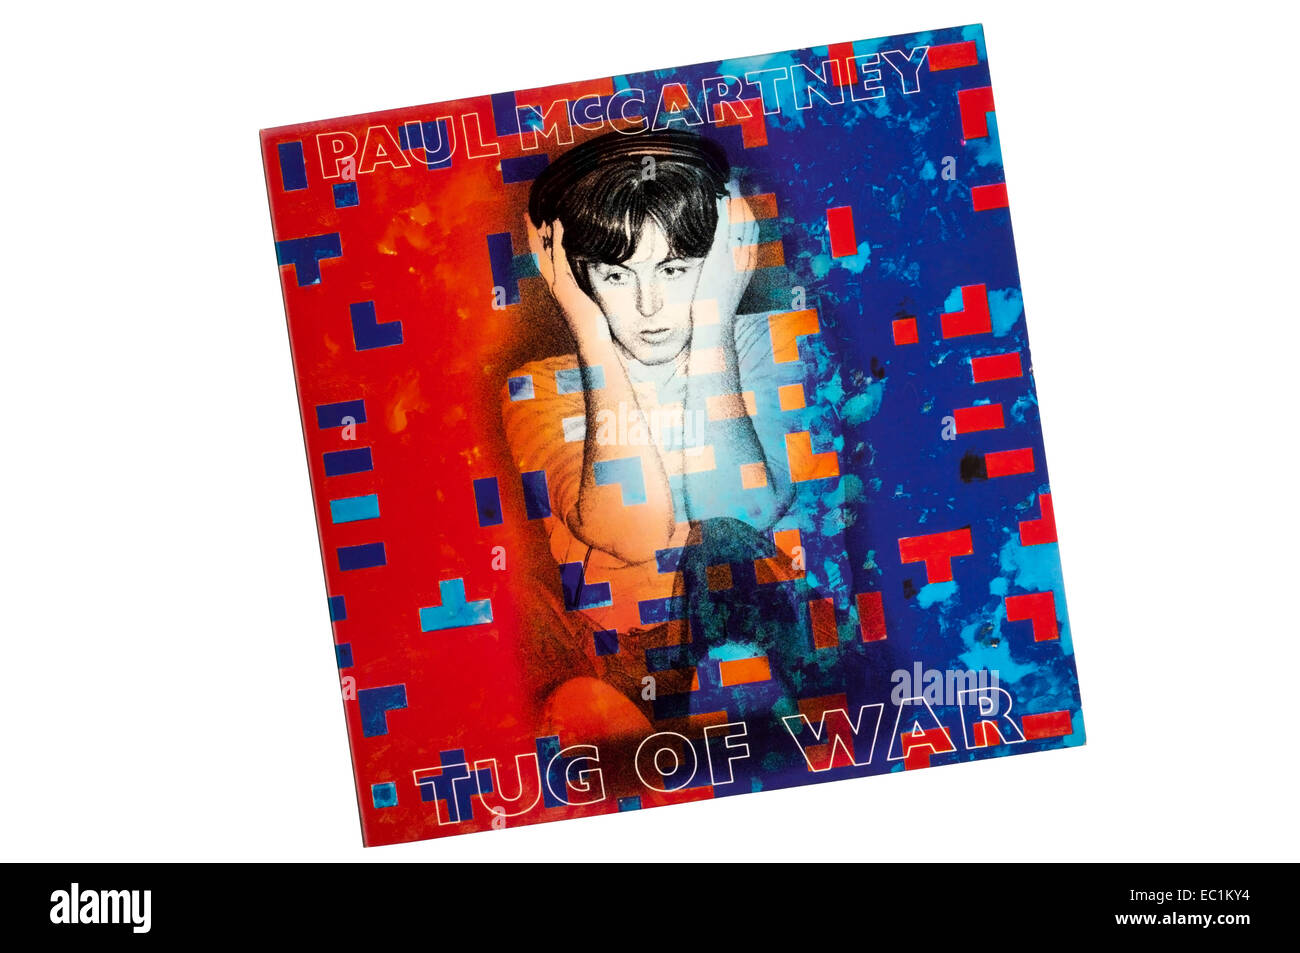 Tug of War was the 3rd solo studio album by Paul McCartney, released in 1982. Stock Photo